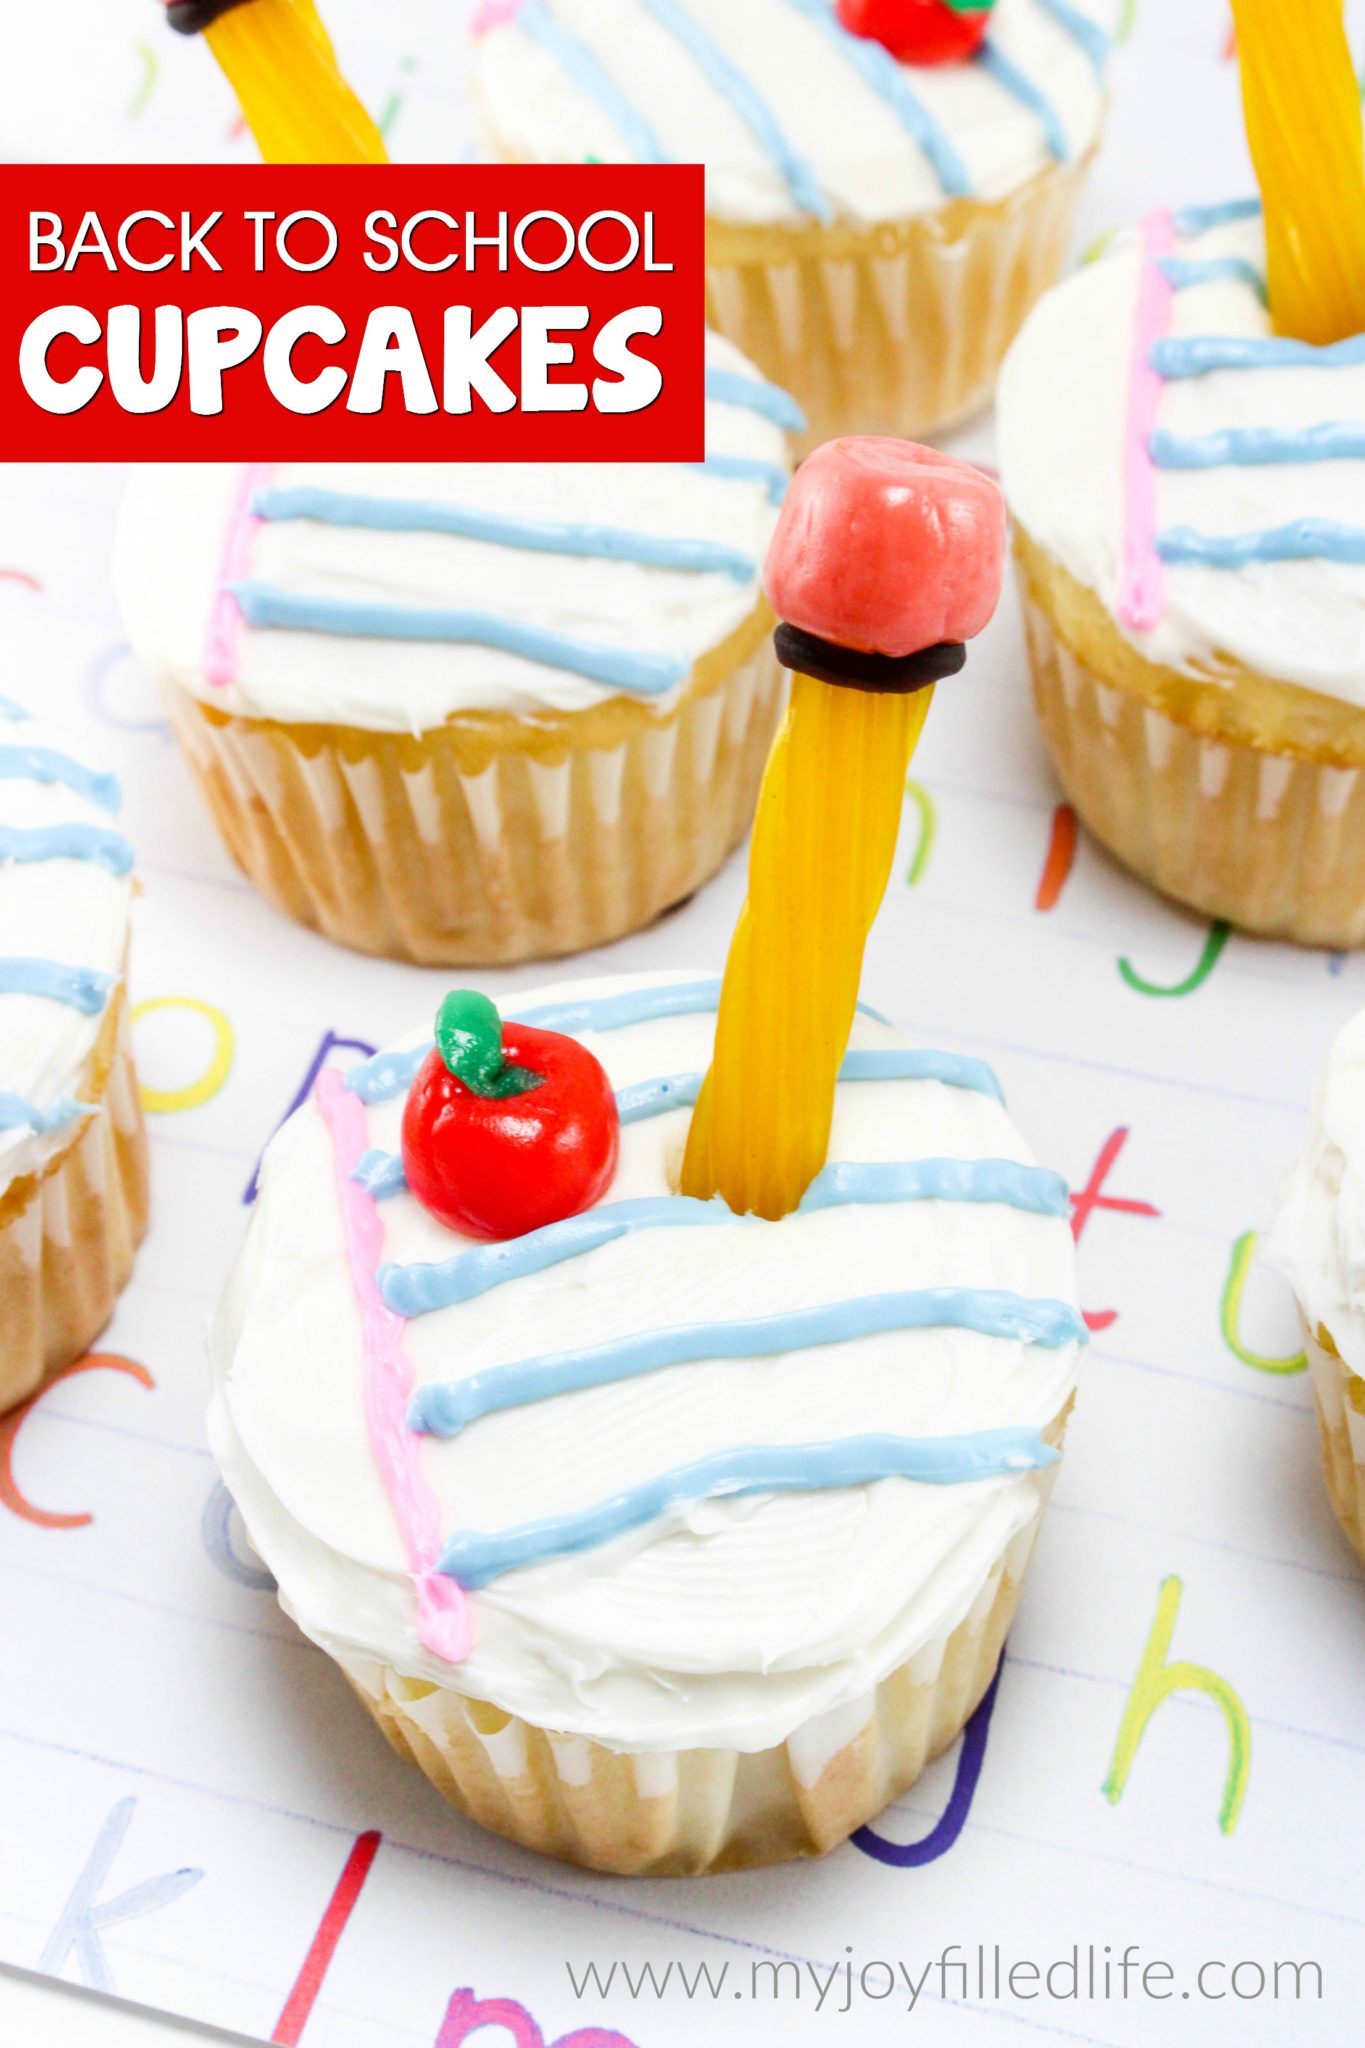 Celebrate the new school year with these adorable, easy to make back to school cupcakes! #cupcakes #backtoschool